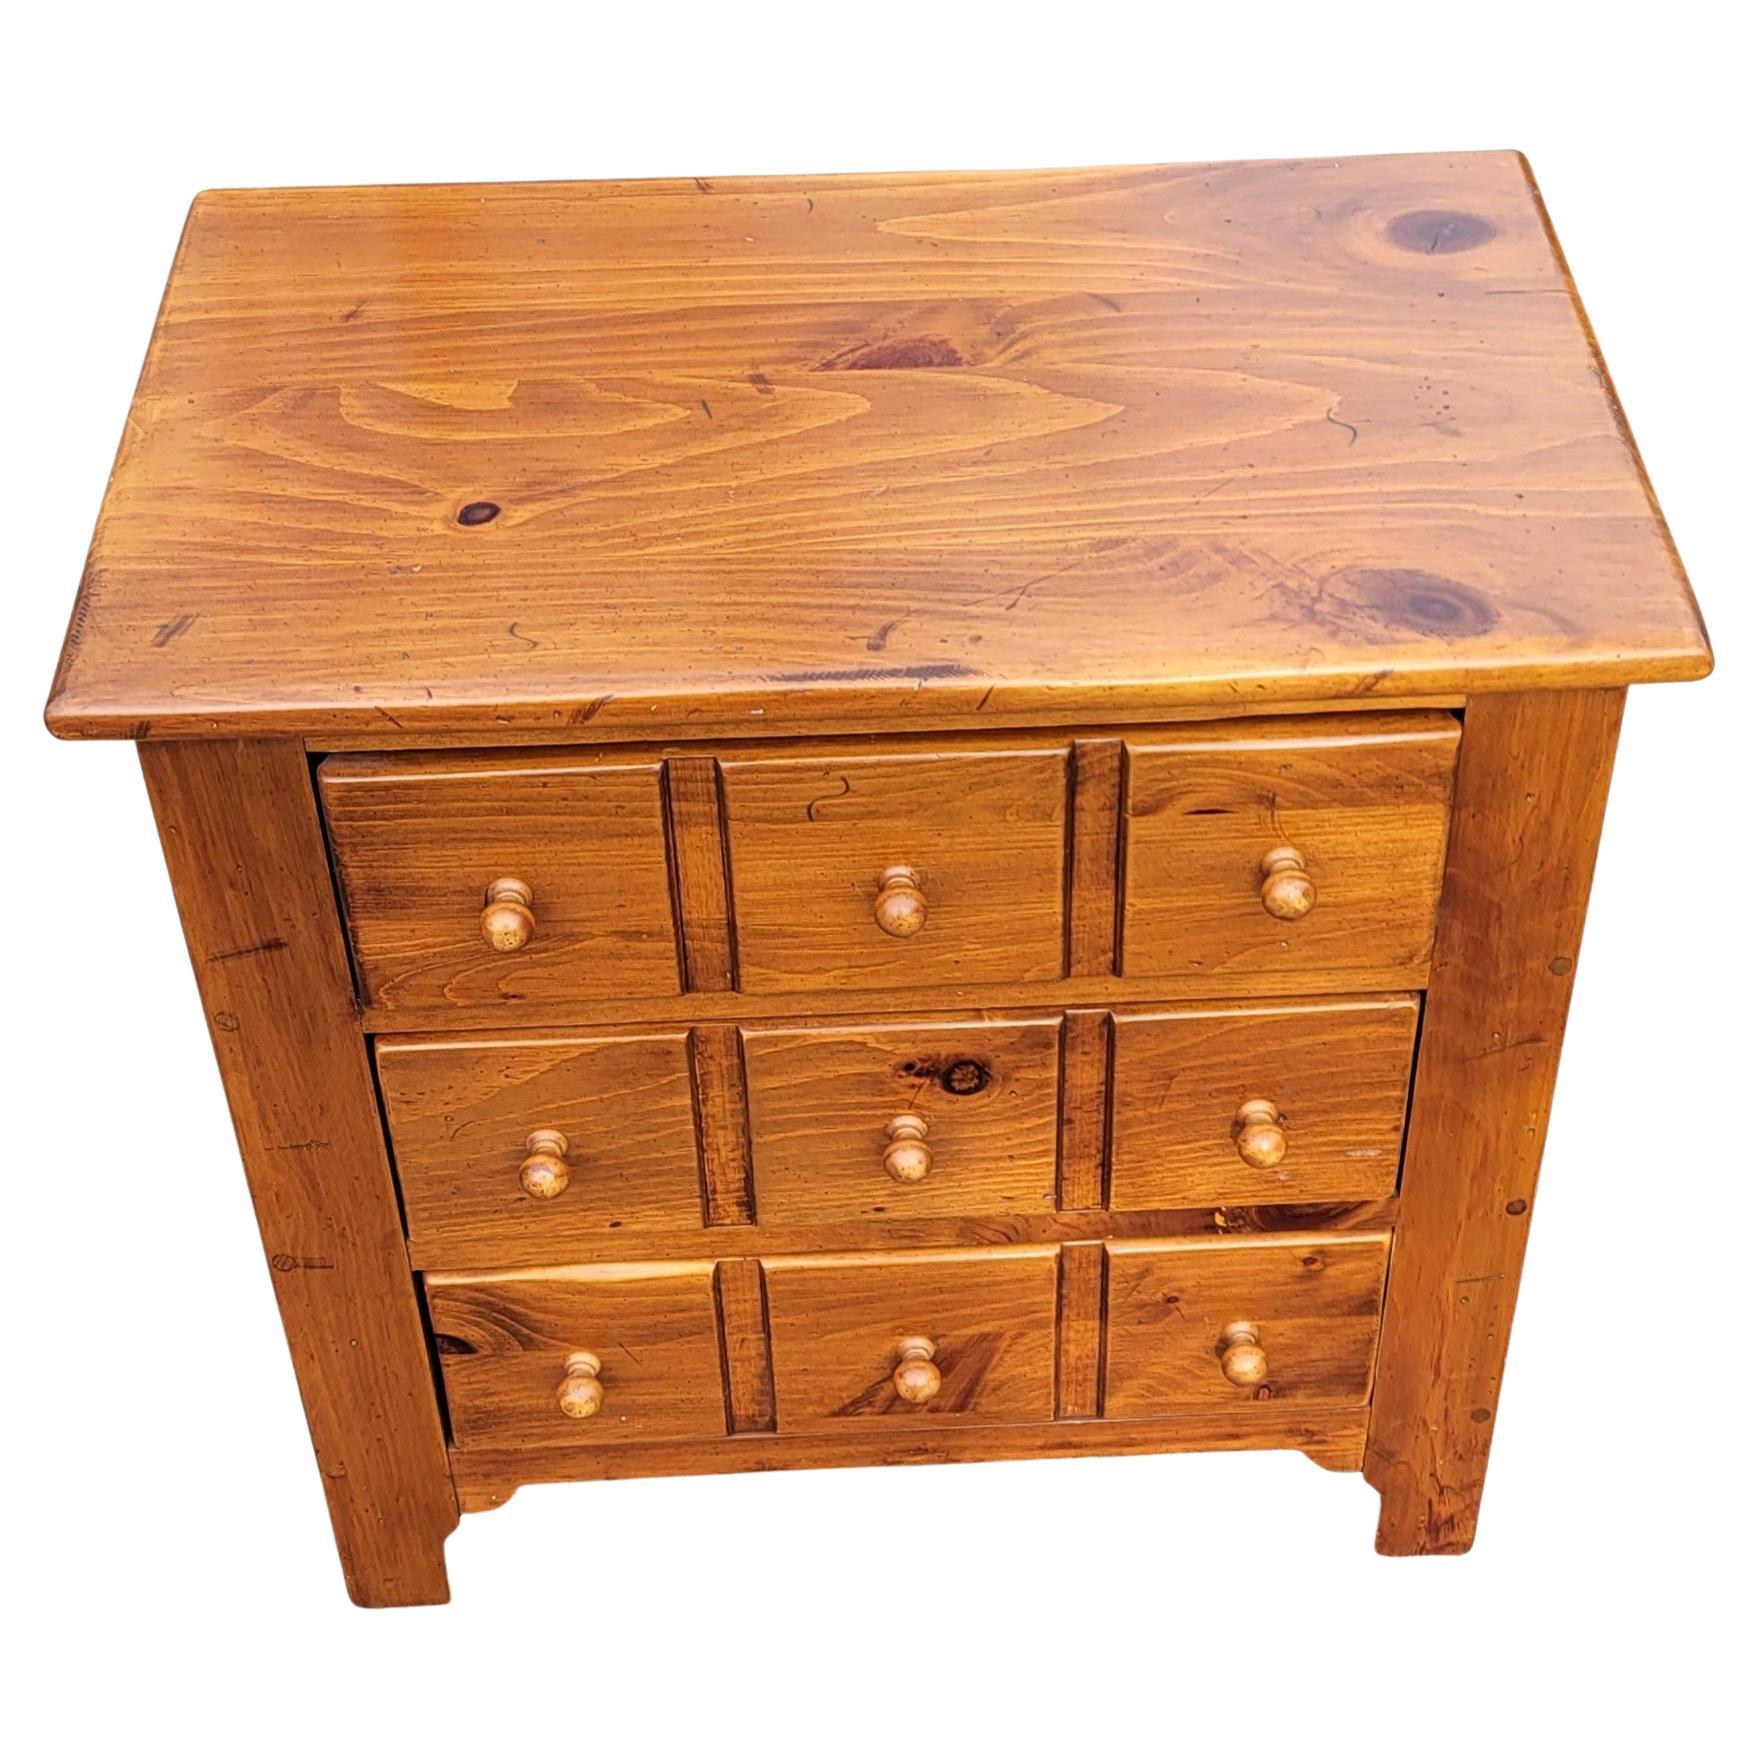 Ethan Allen Early American Style Bedside Chest of drawers / Nightstand. Features three drawers with dovetail joints showing like 9 drawers. Light weight pine wood.